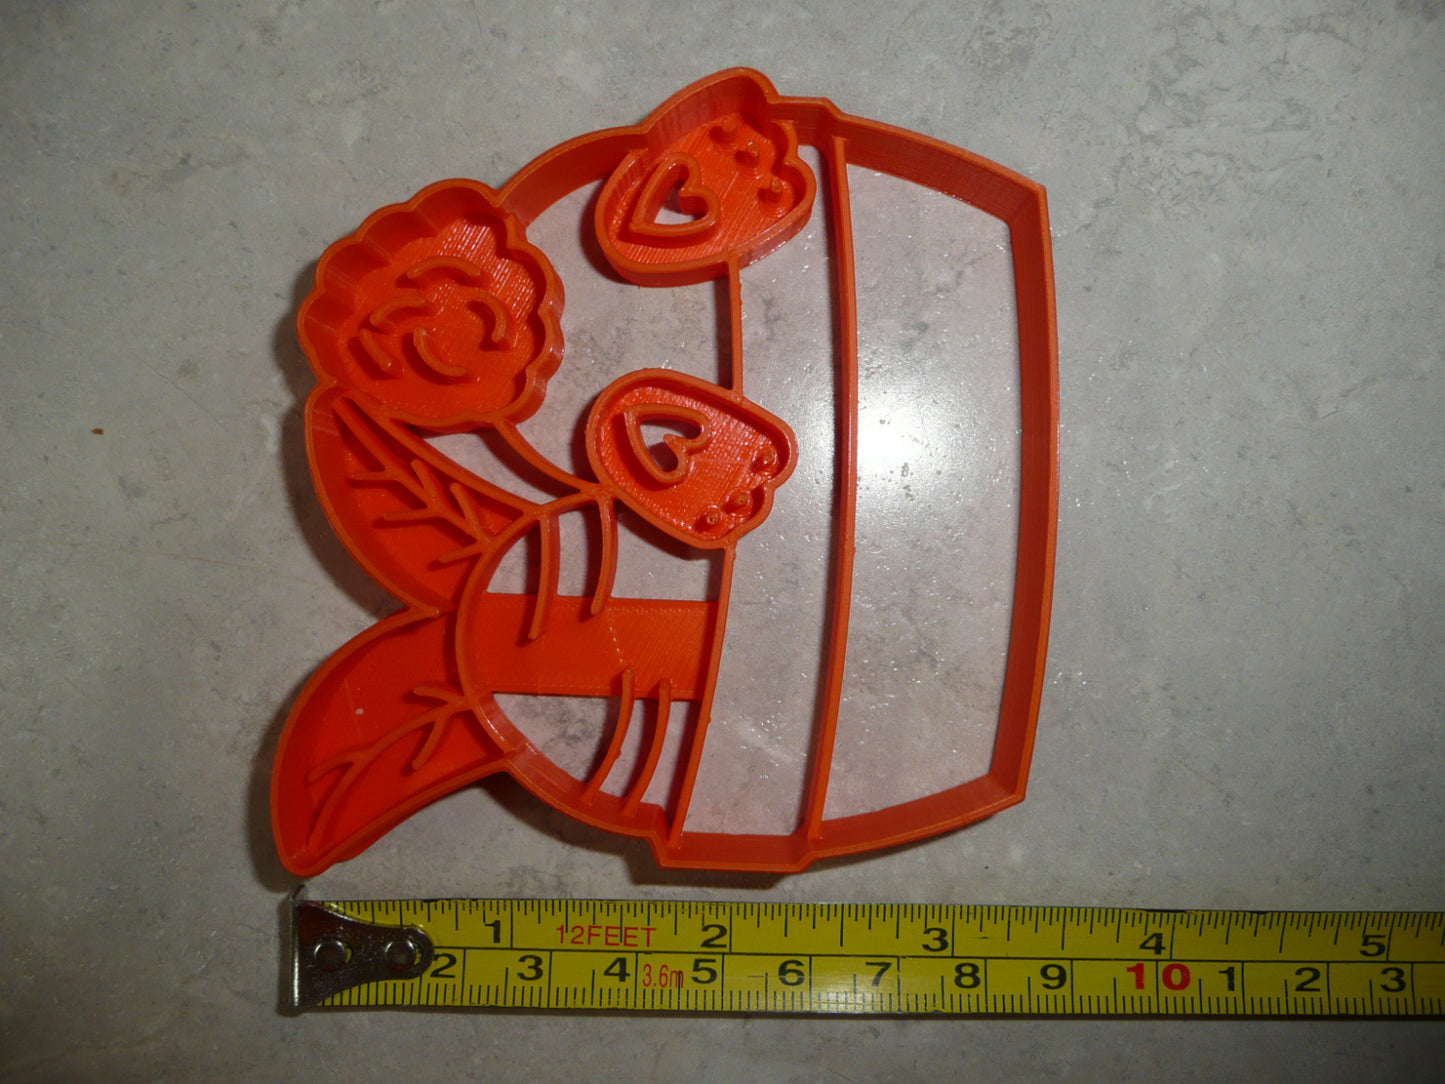 Easter Bunny and Carrot in Flower Pot Cookie Cutter Made in USA PR4740